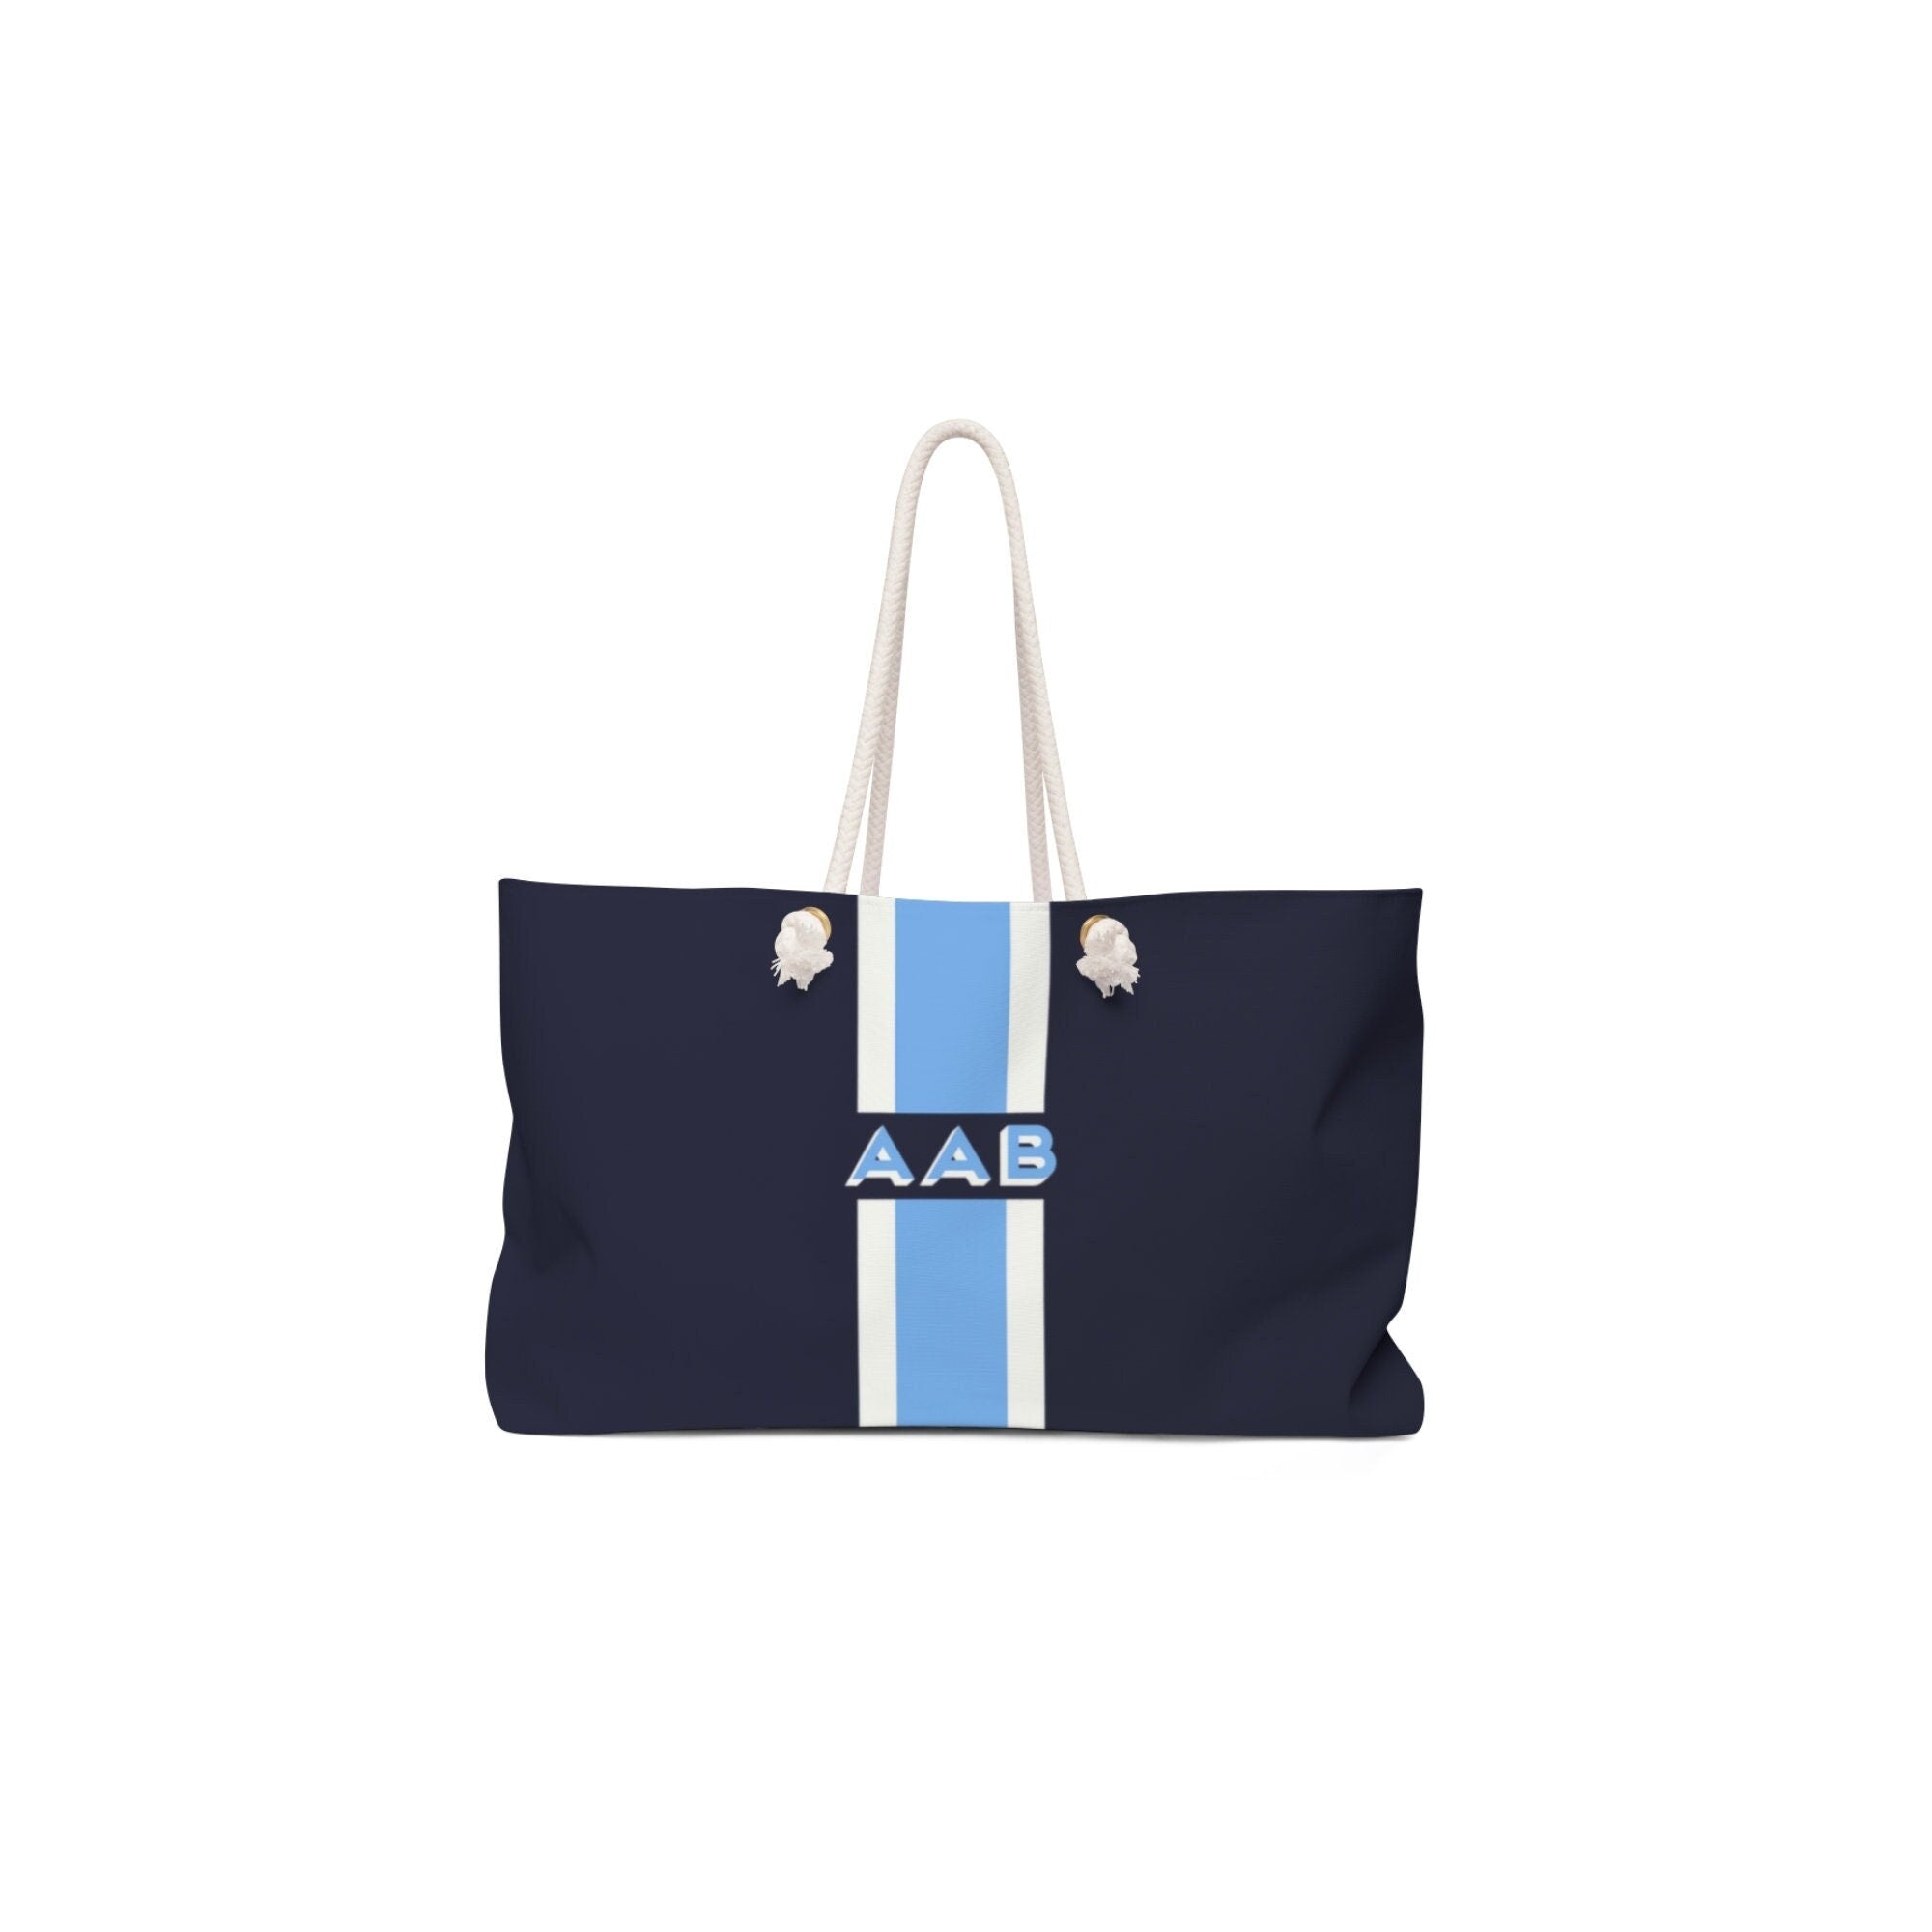 Personalized Duffel Bag with Initials - Personalized Brides